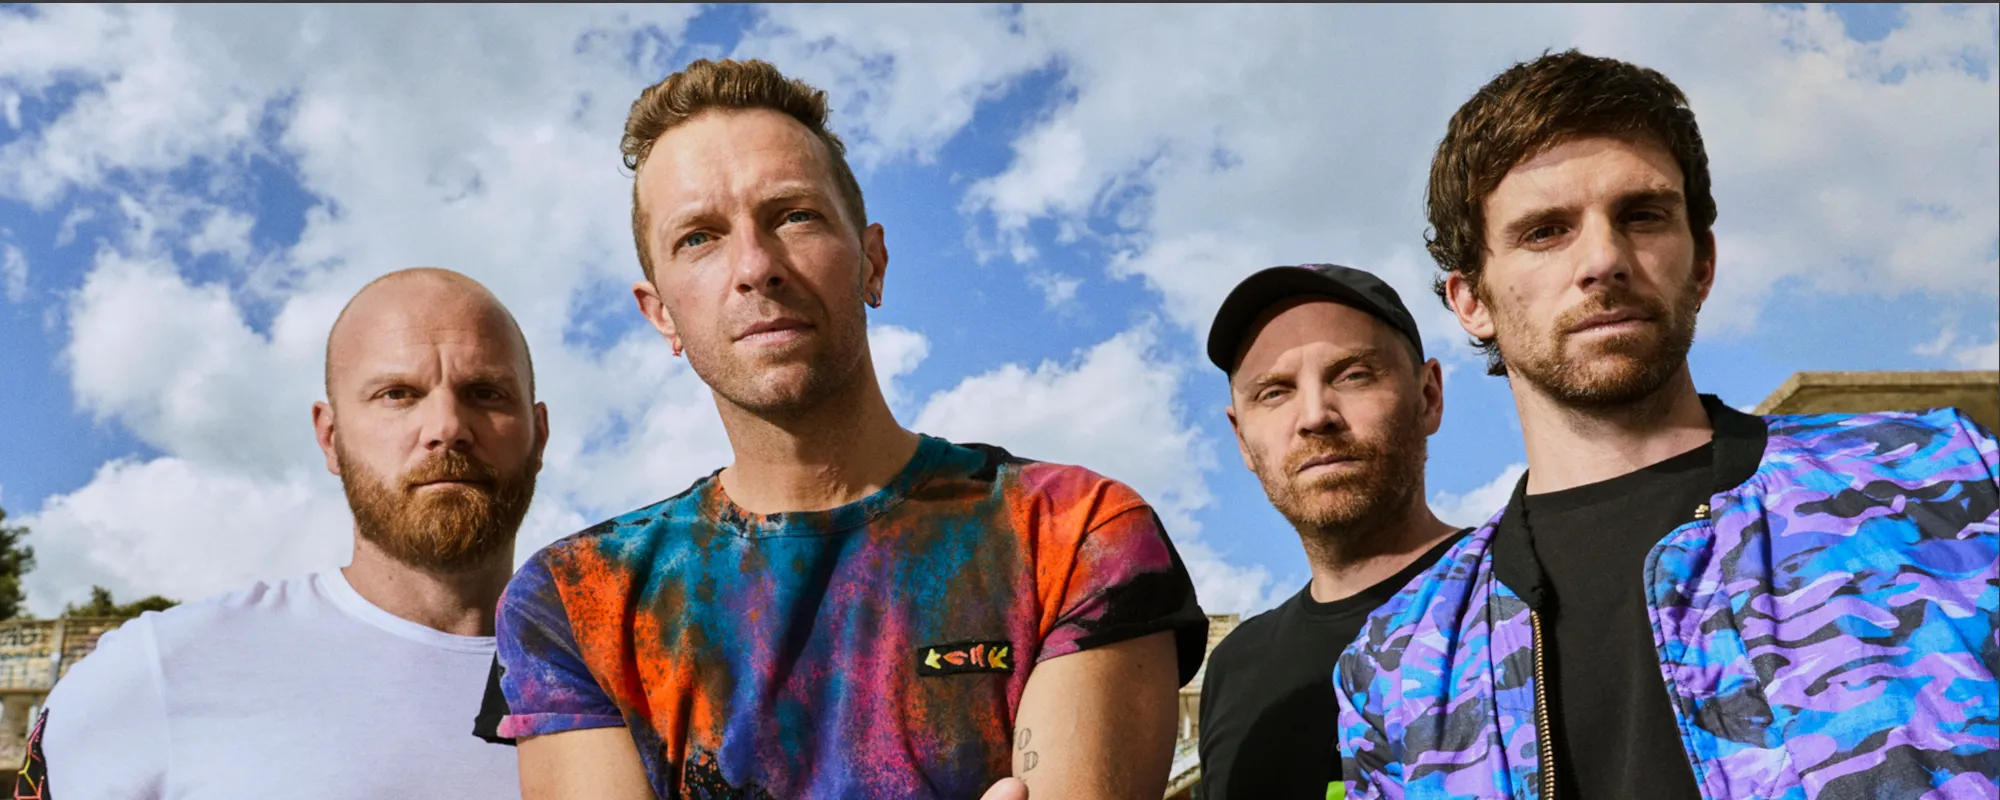 Coldplay Marks 20th Anniversary of Second Album, ‘A Rush of Blood to the Head,’ with Upgraded “The Scientist” Video